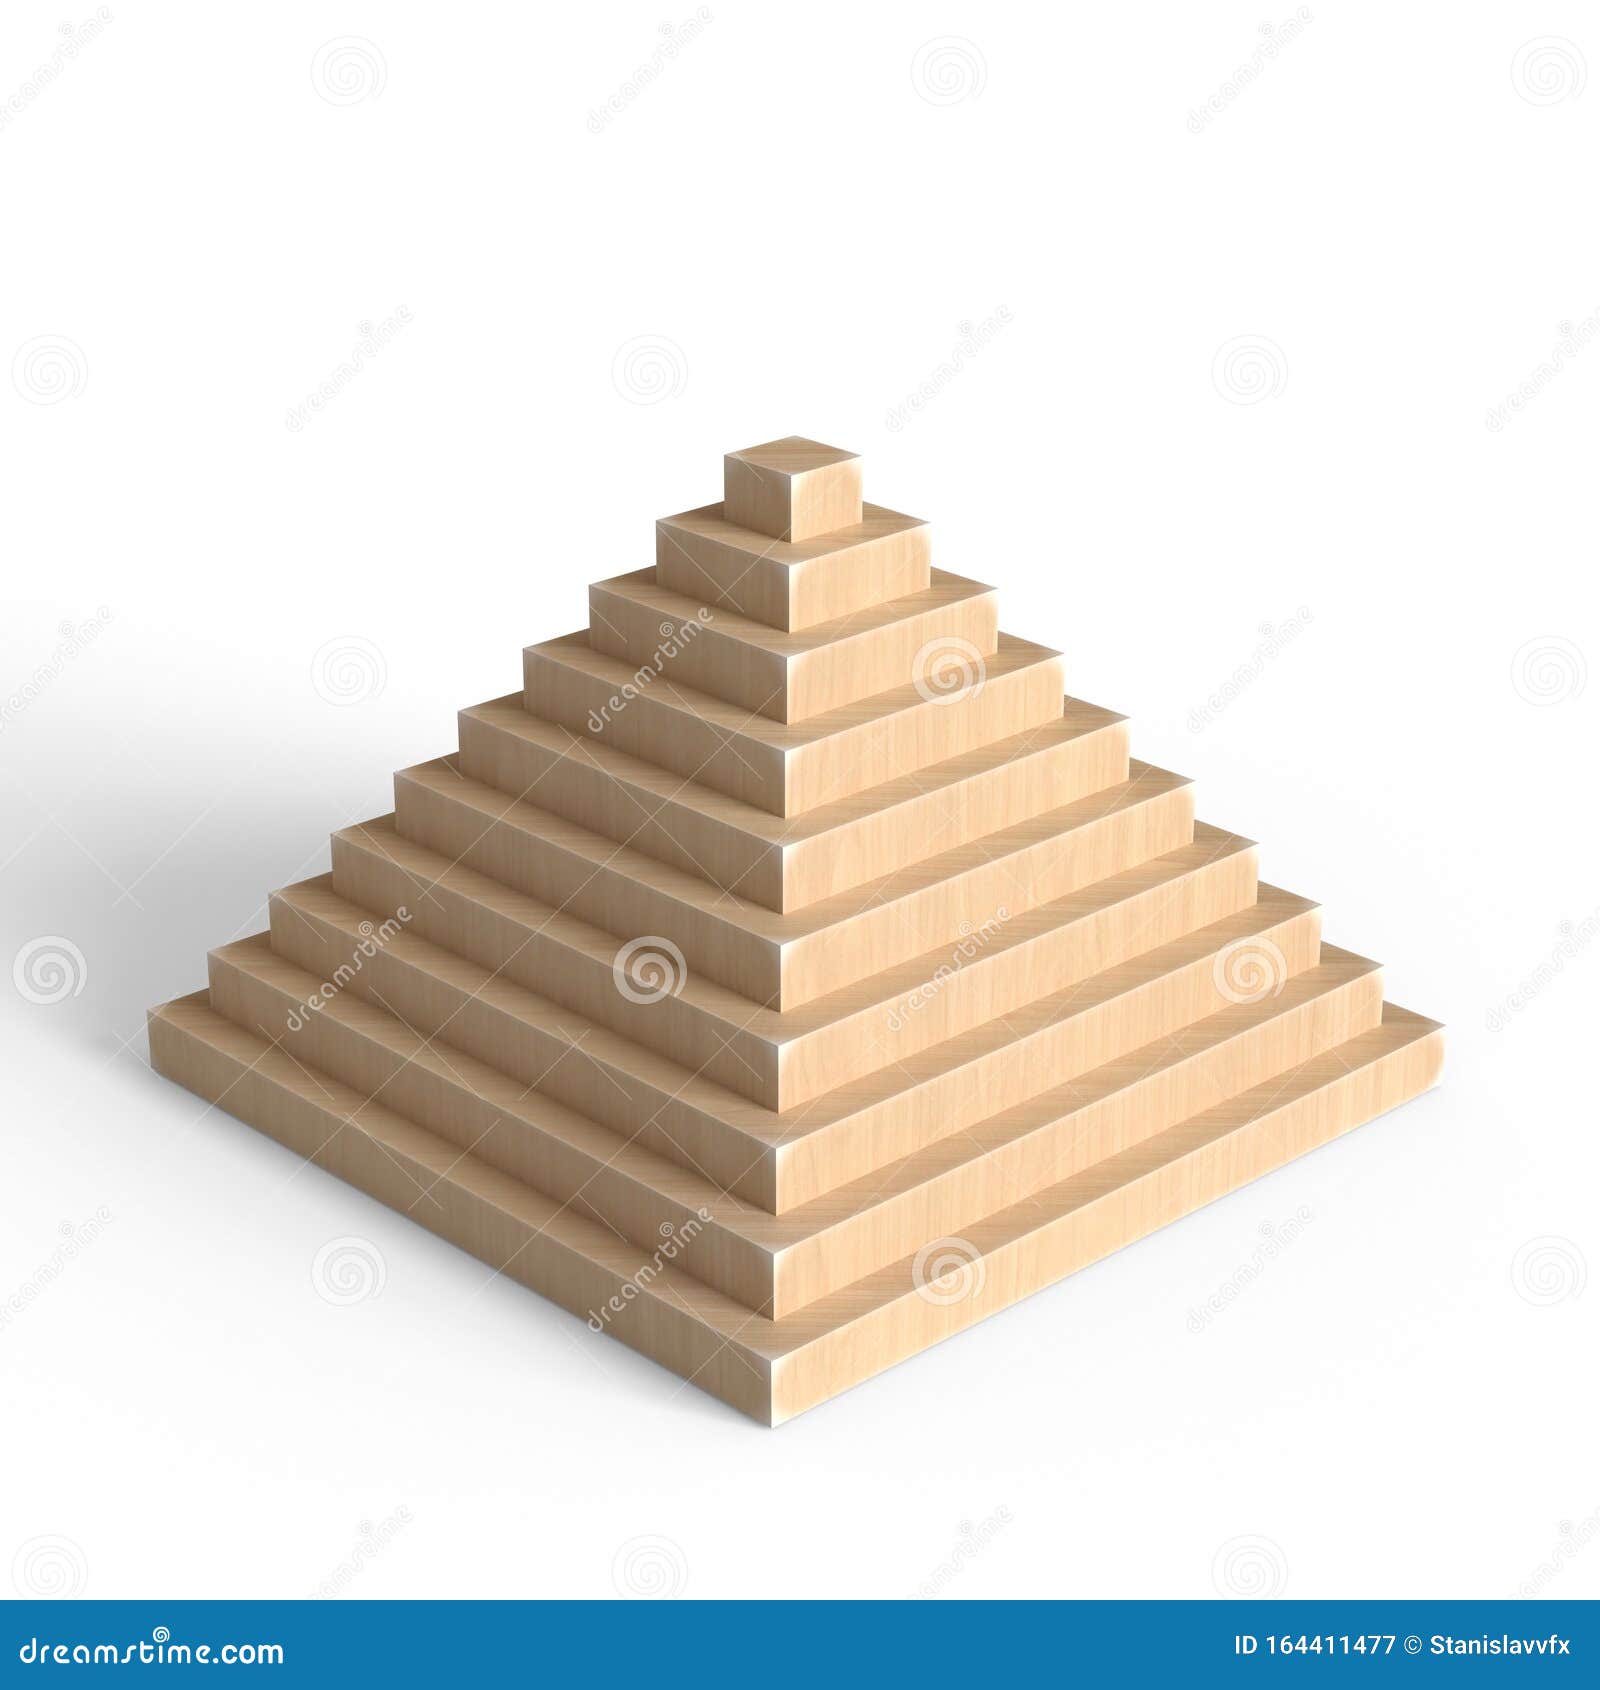 Wooden Step Pyramid. Geometric Shape with Stairs. Stock Illustration ...